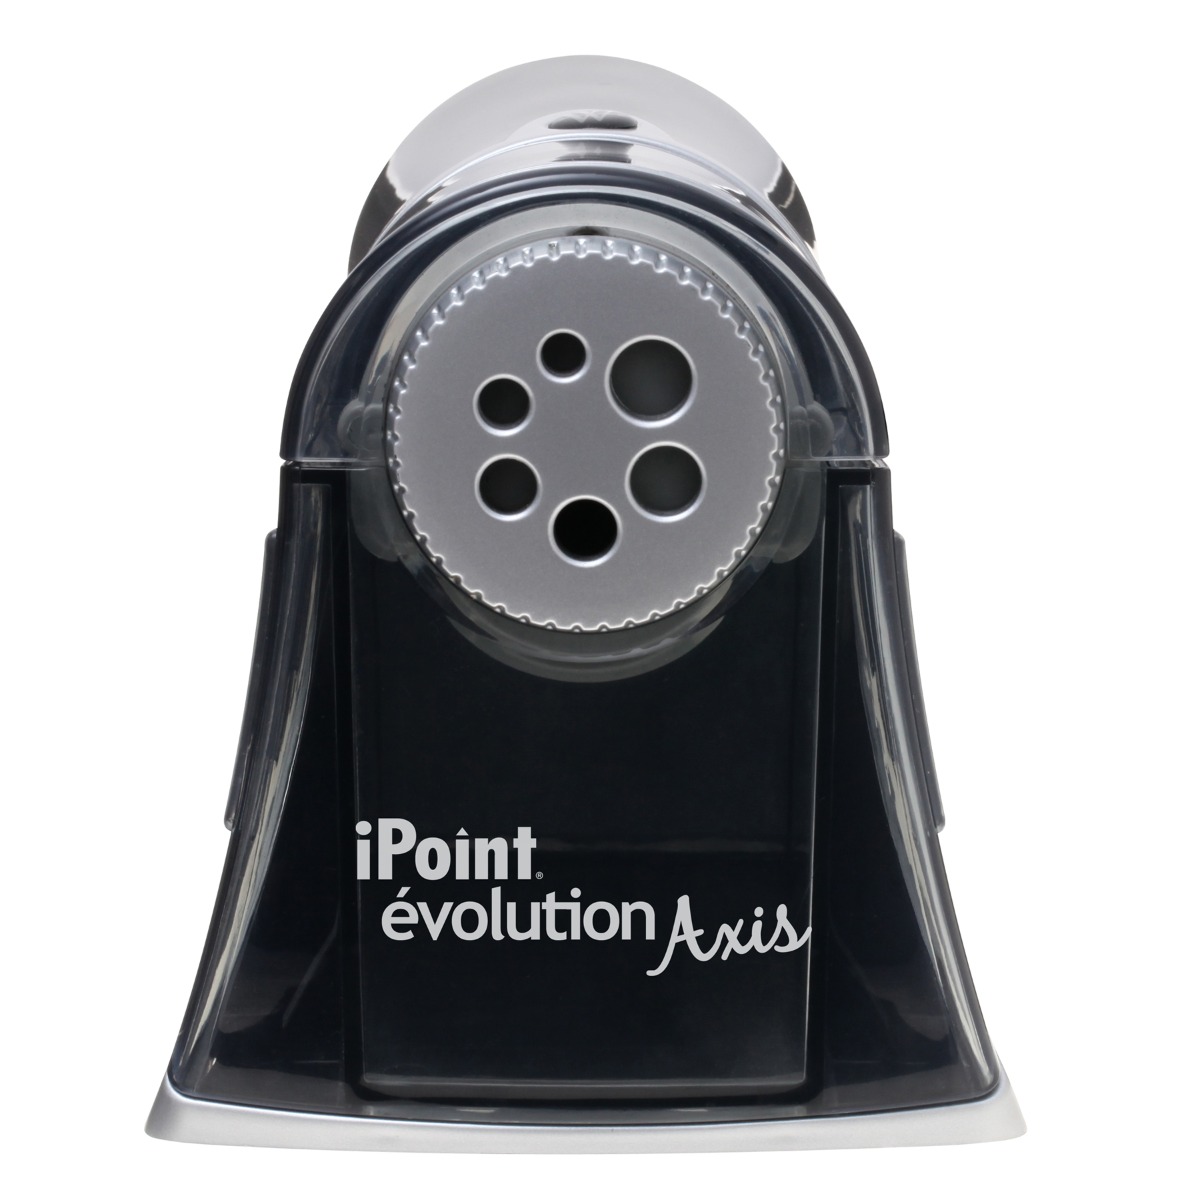 Westcott Electric iPoint Evolution Axis Heavy Duty Pencil Sharpener, Black and Silver (15509)